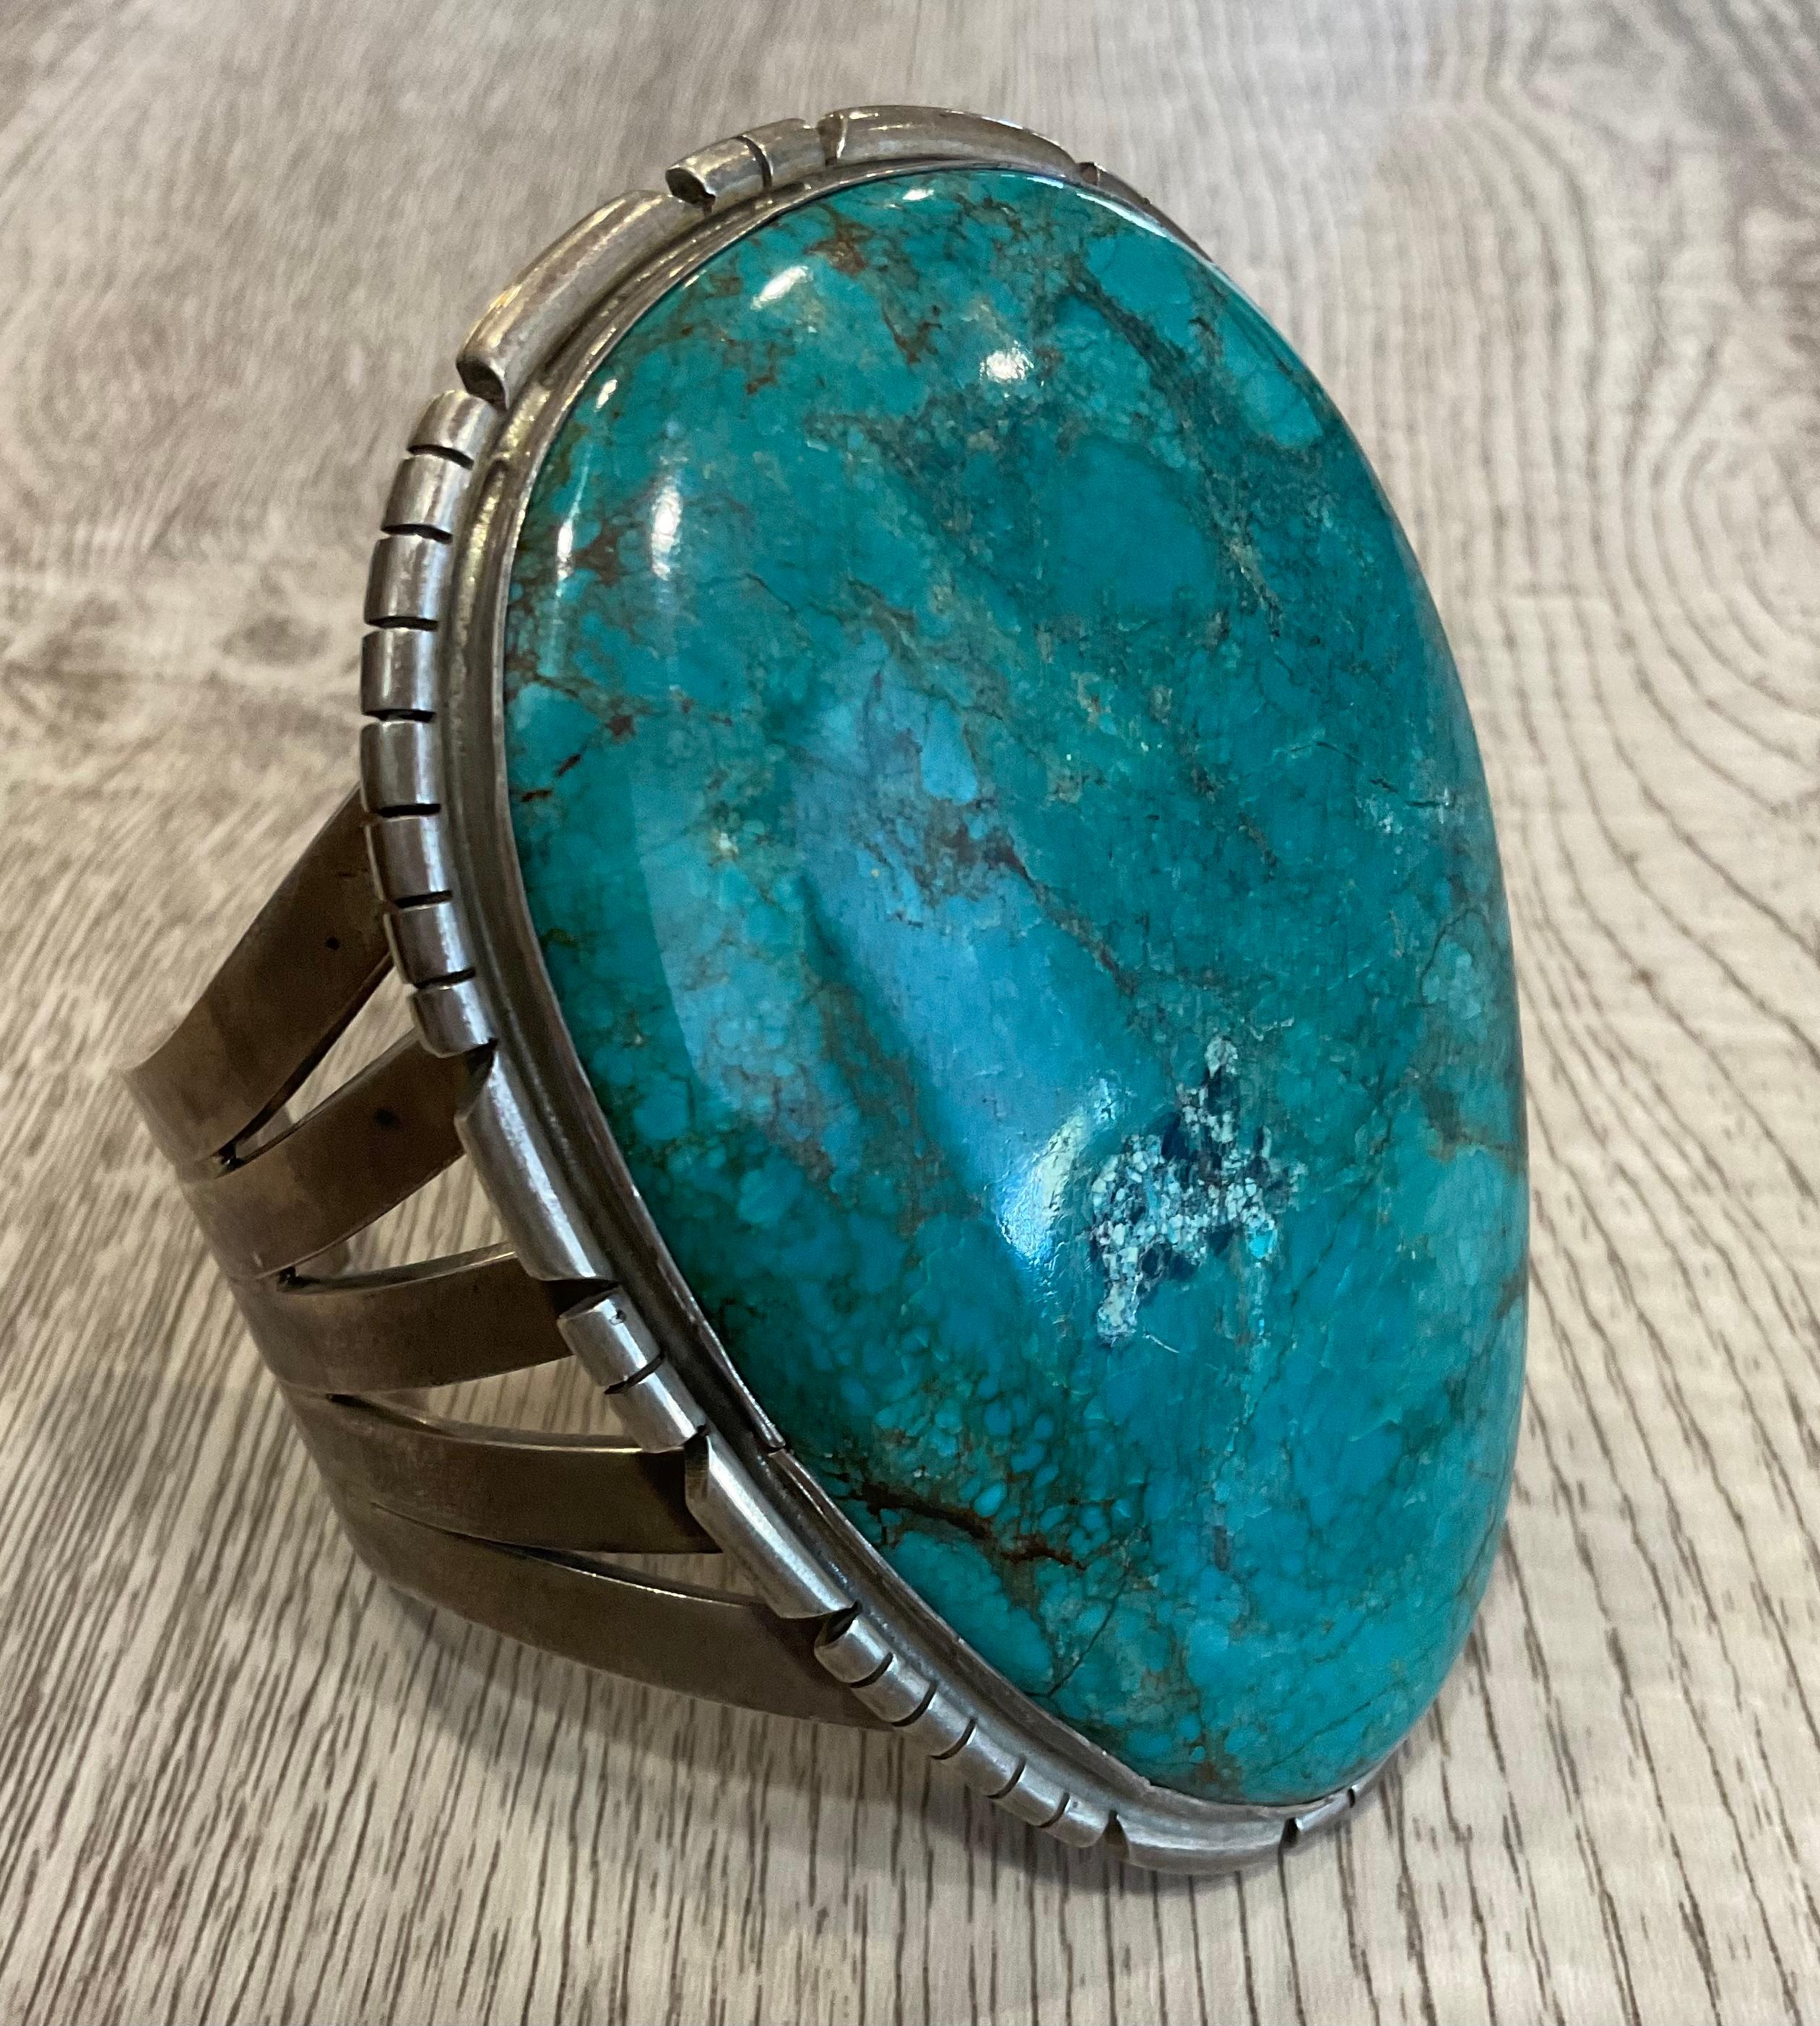 This Roy Buck sterling silver cuff boasts the largest piece of turquoise I've represented yet. The slab measures 3